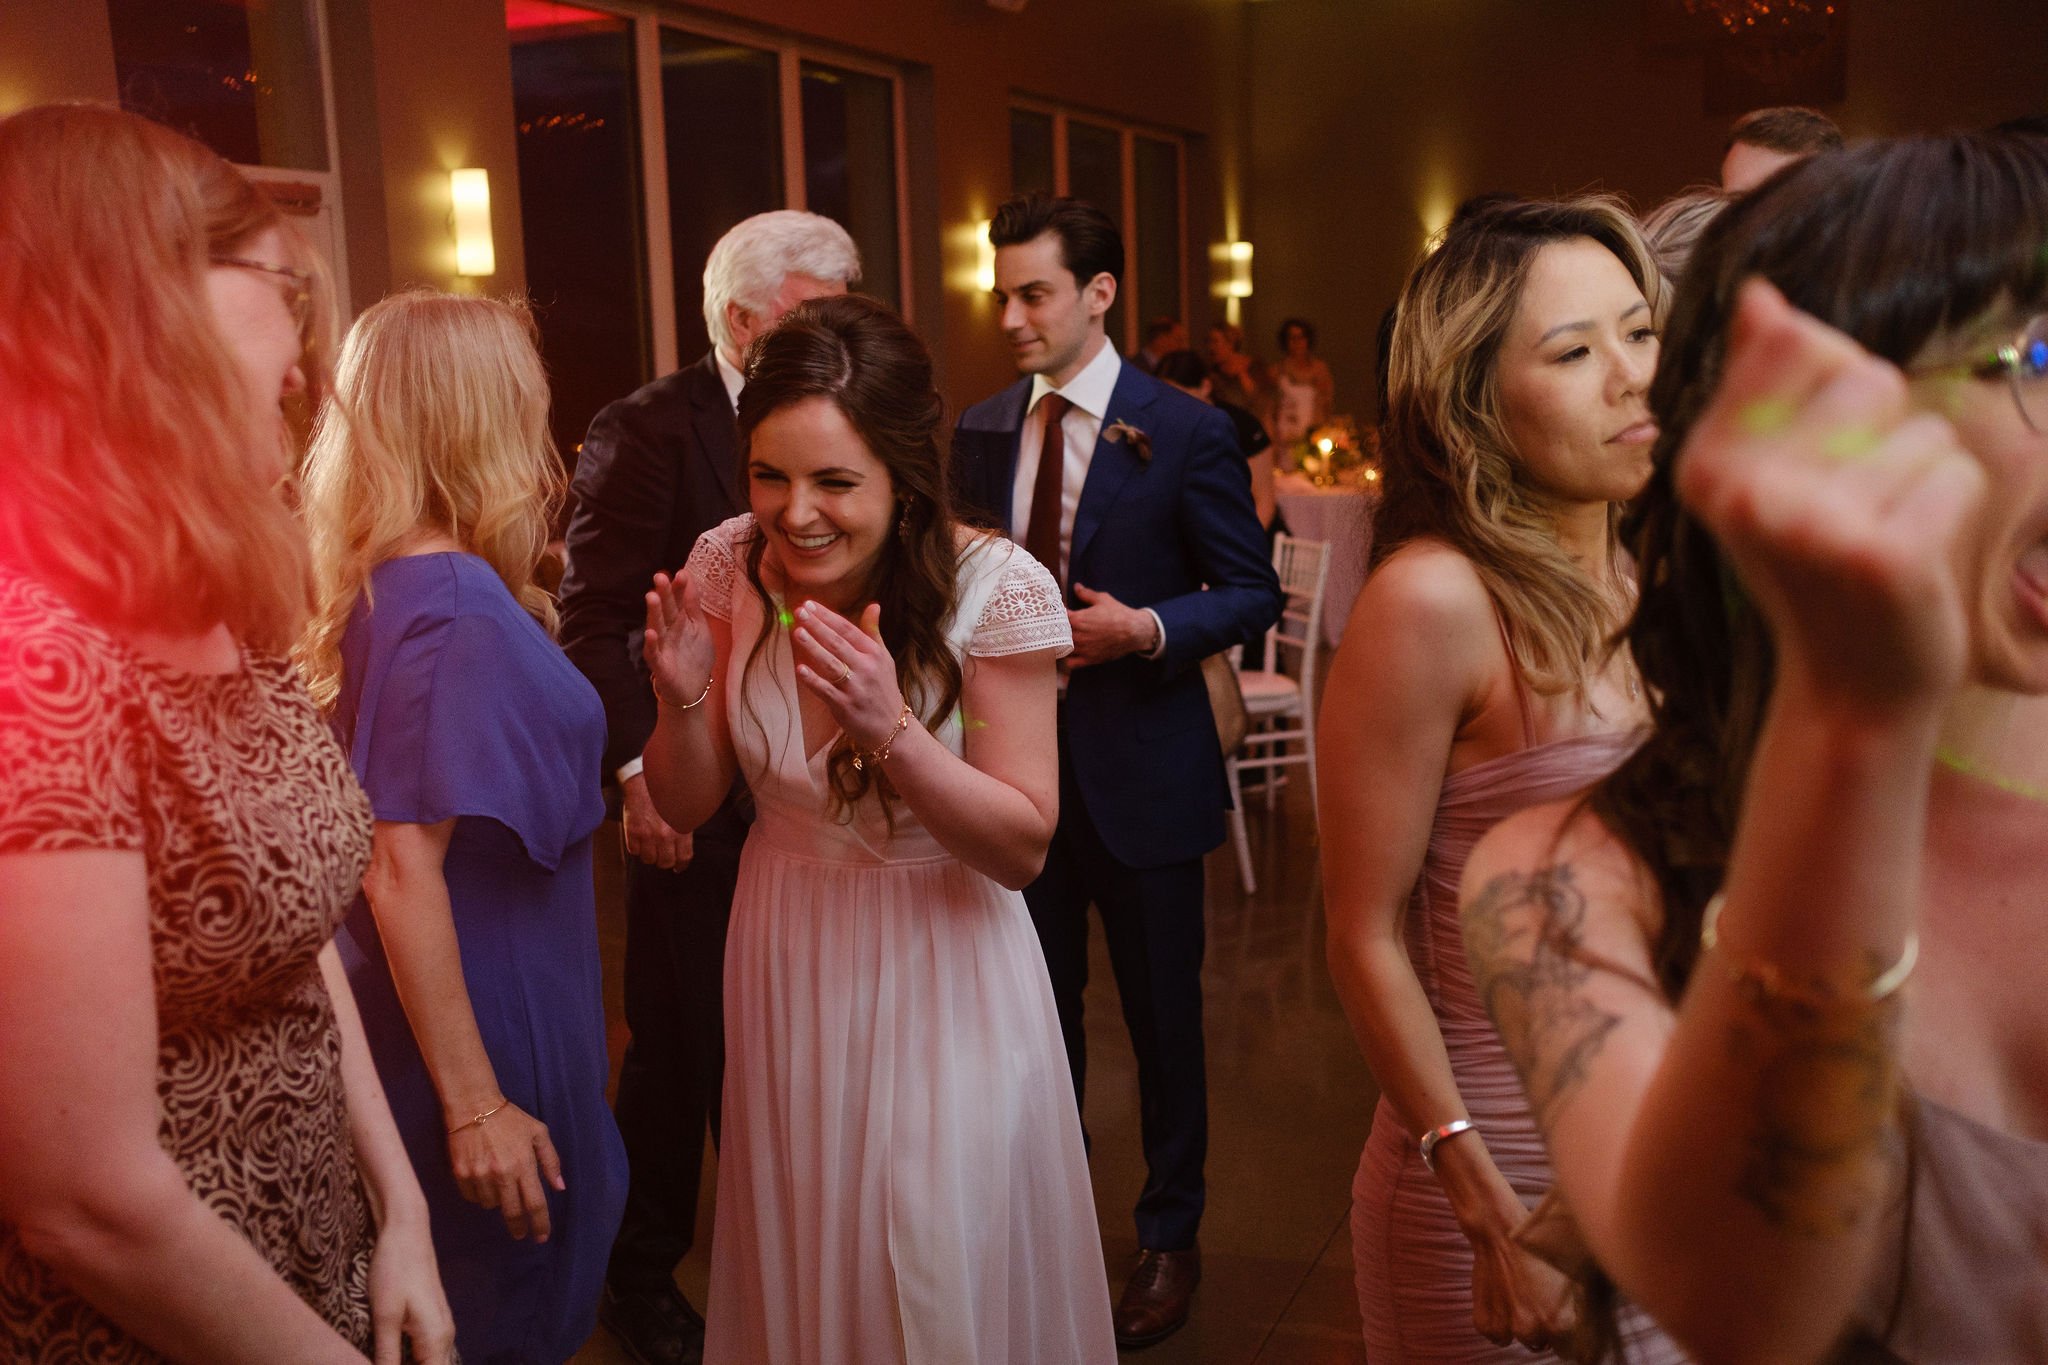  dance party at a le belvedere wedding reception 